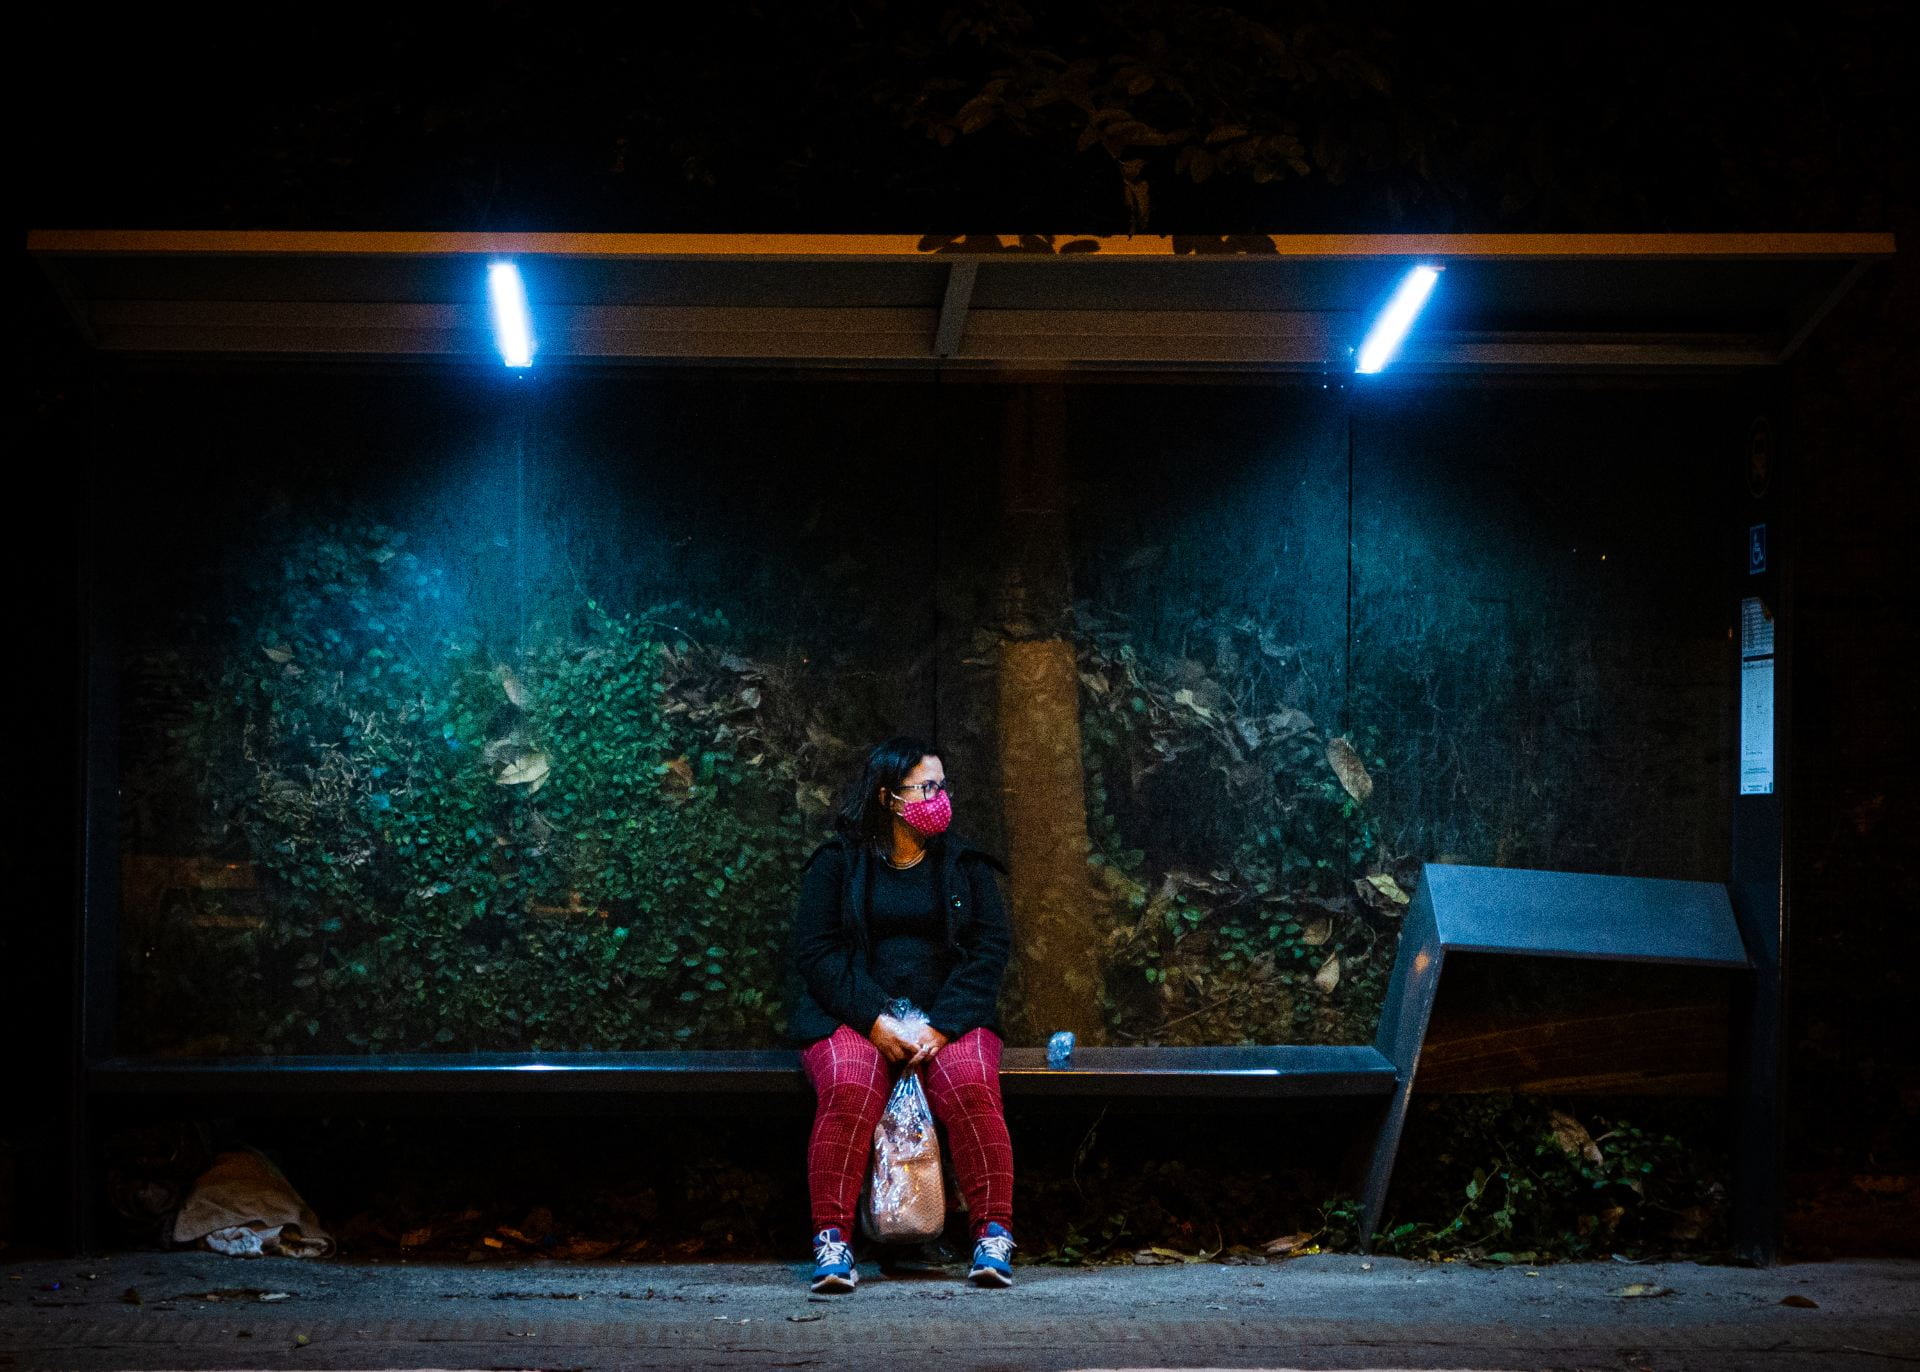 woman in red mask waiting for a bus